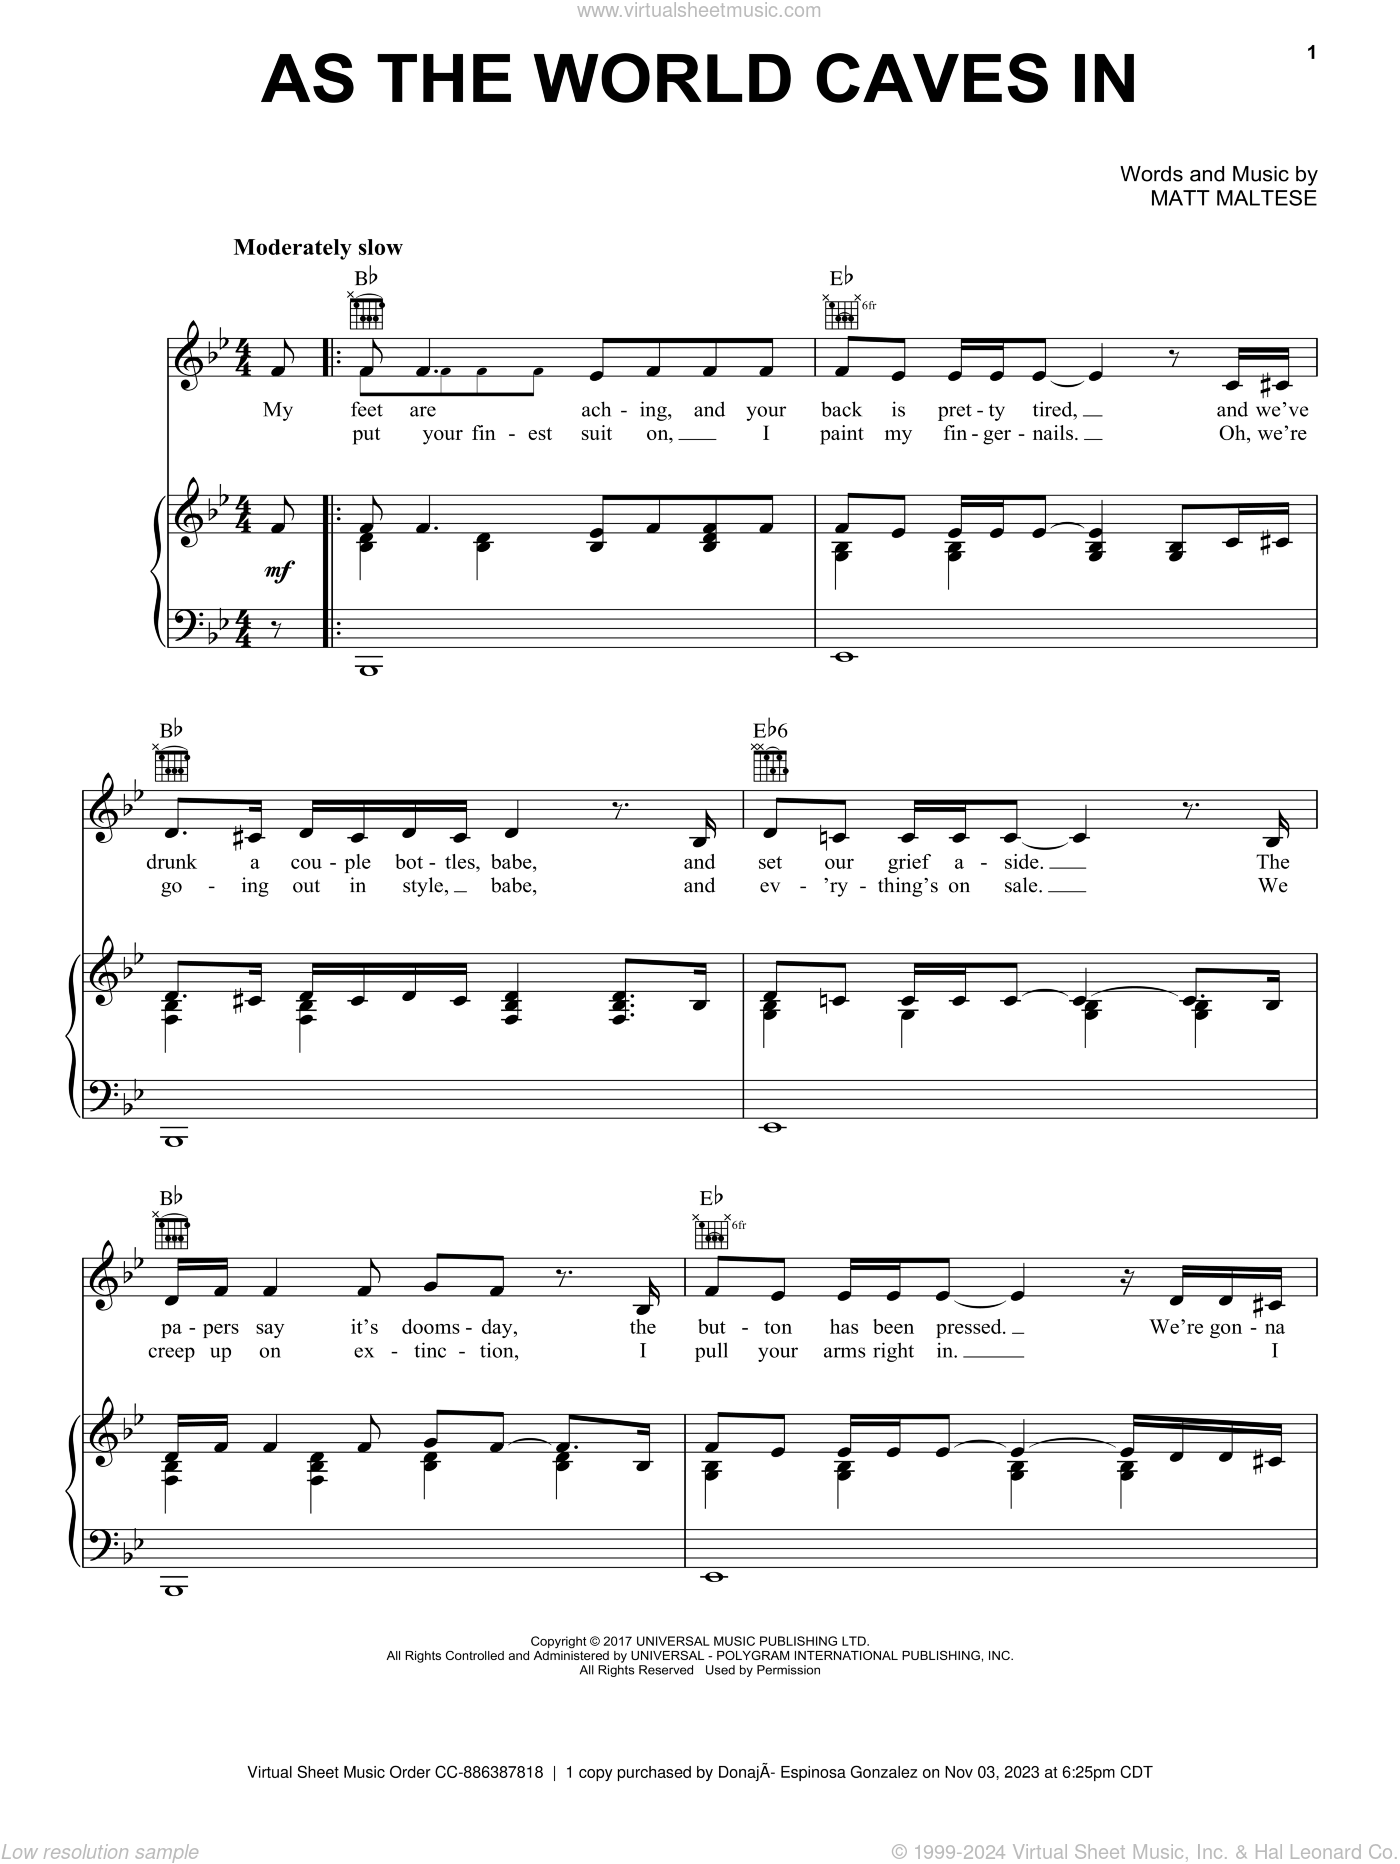 Maltese - As The World Caves In sheet music for voice, piano or guitar